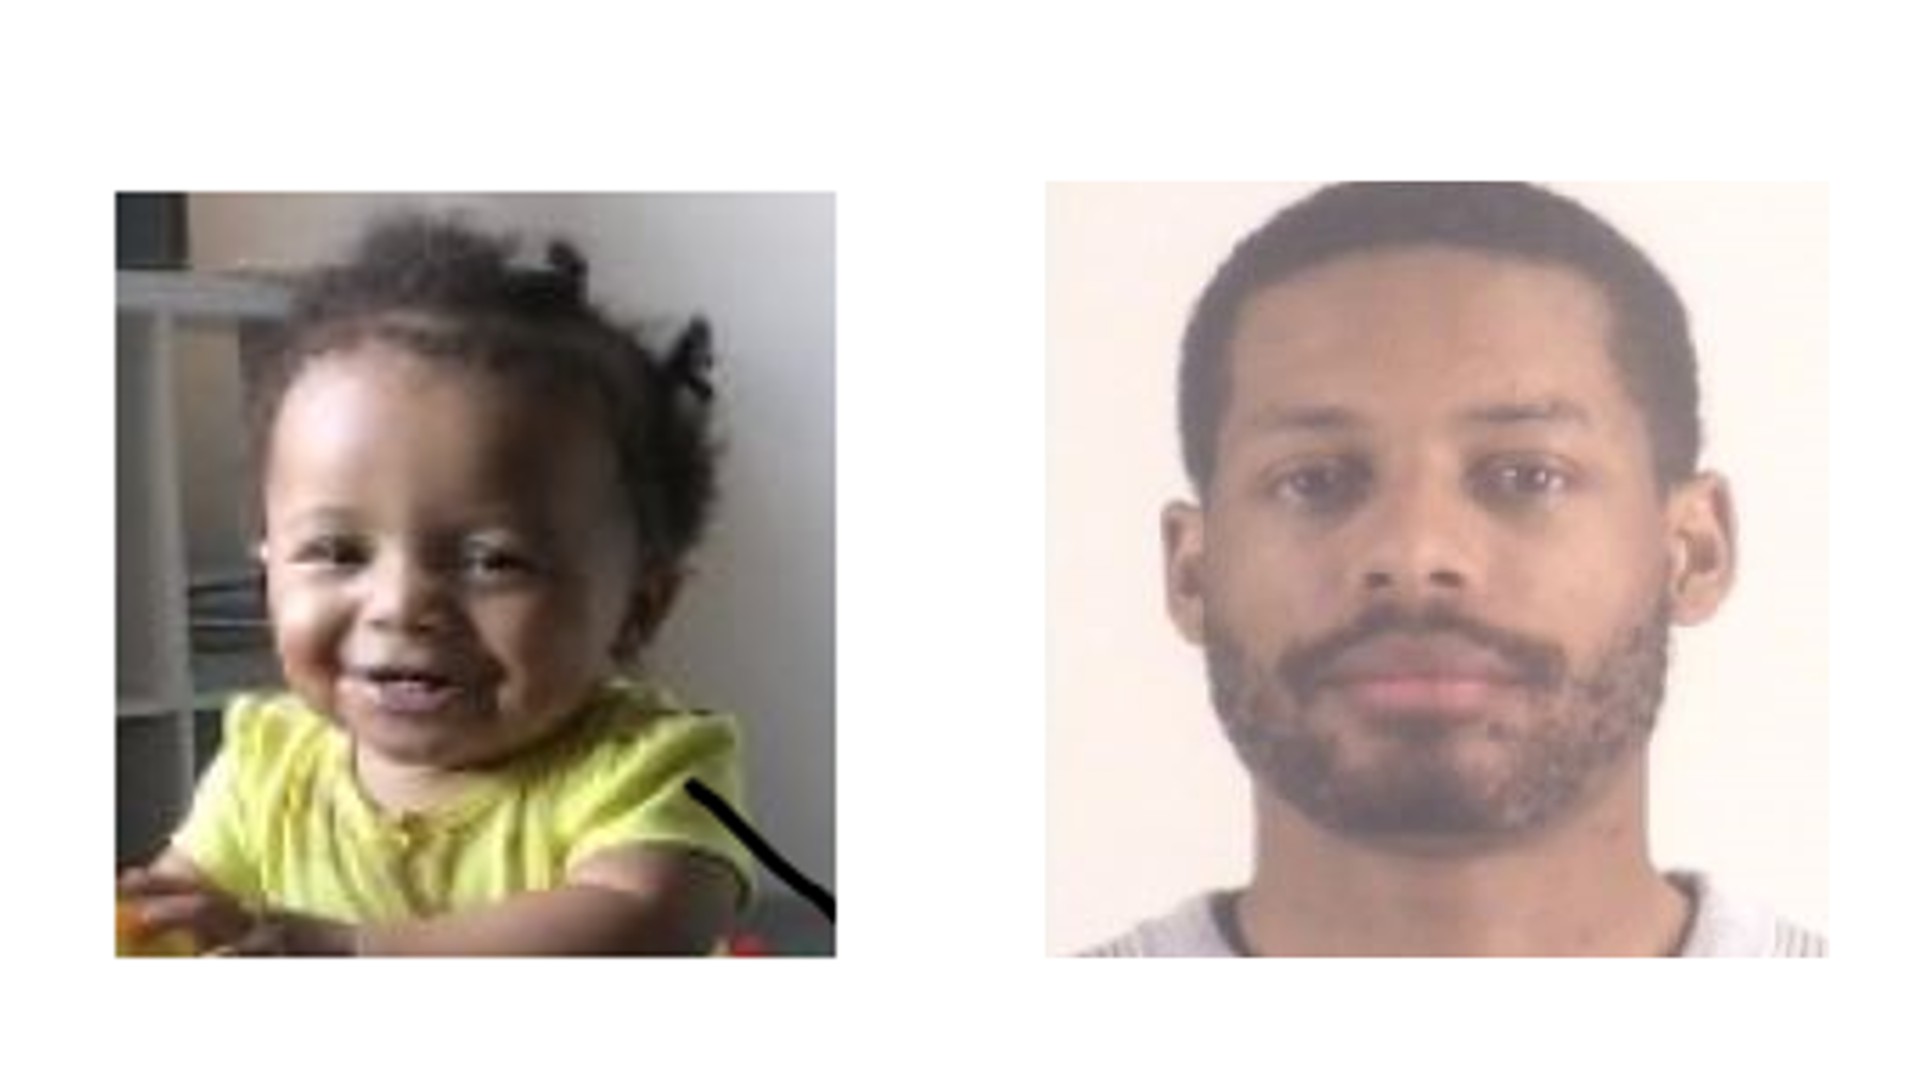 Amber Alert issued for 11-month-old girl from Fort Worth